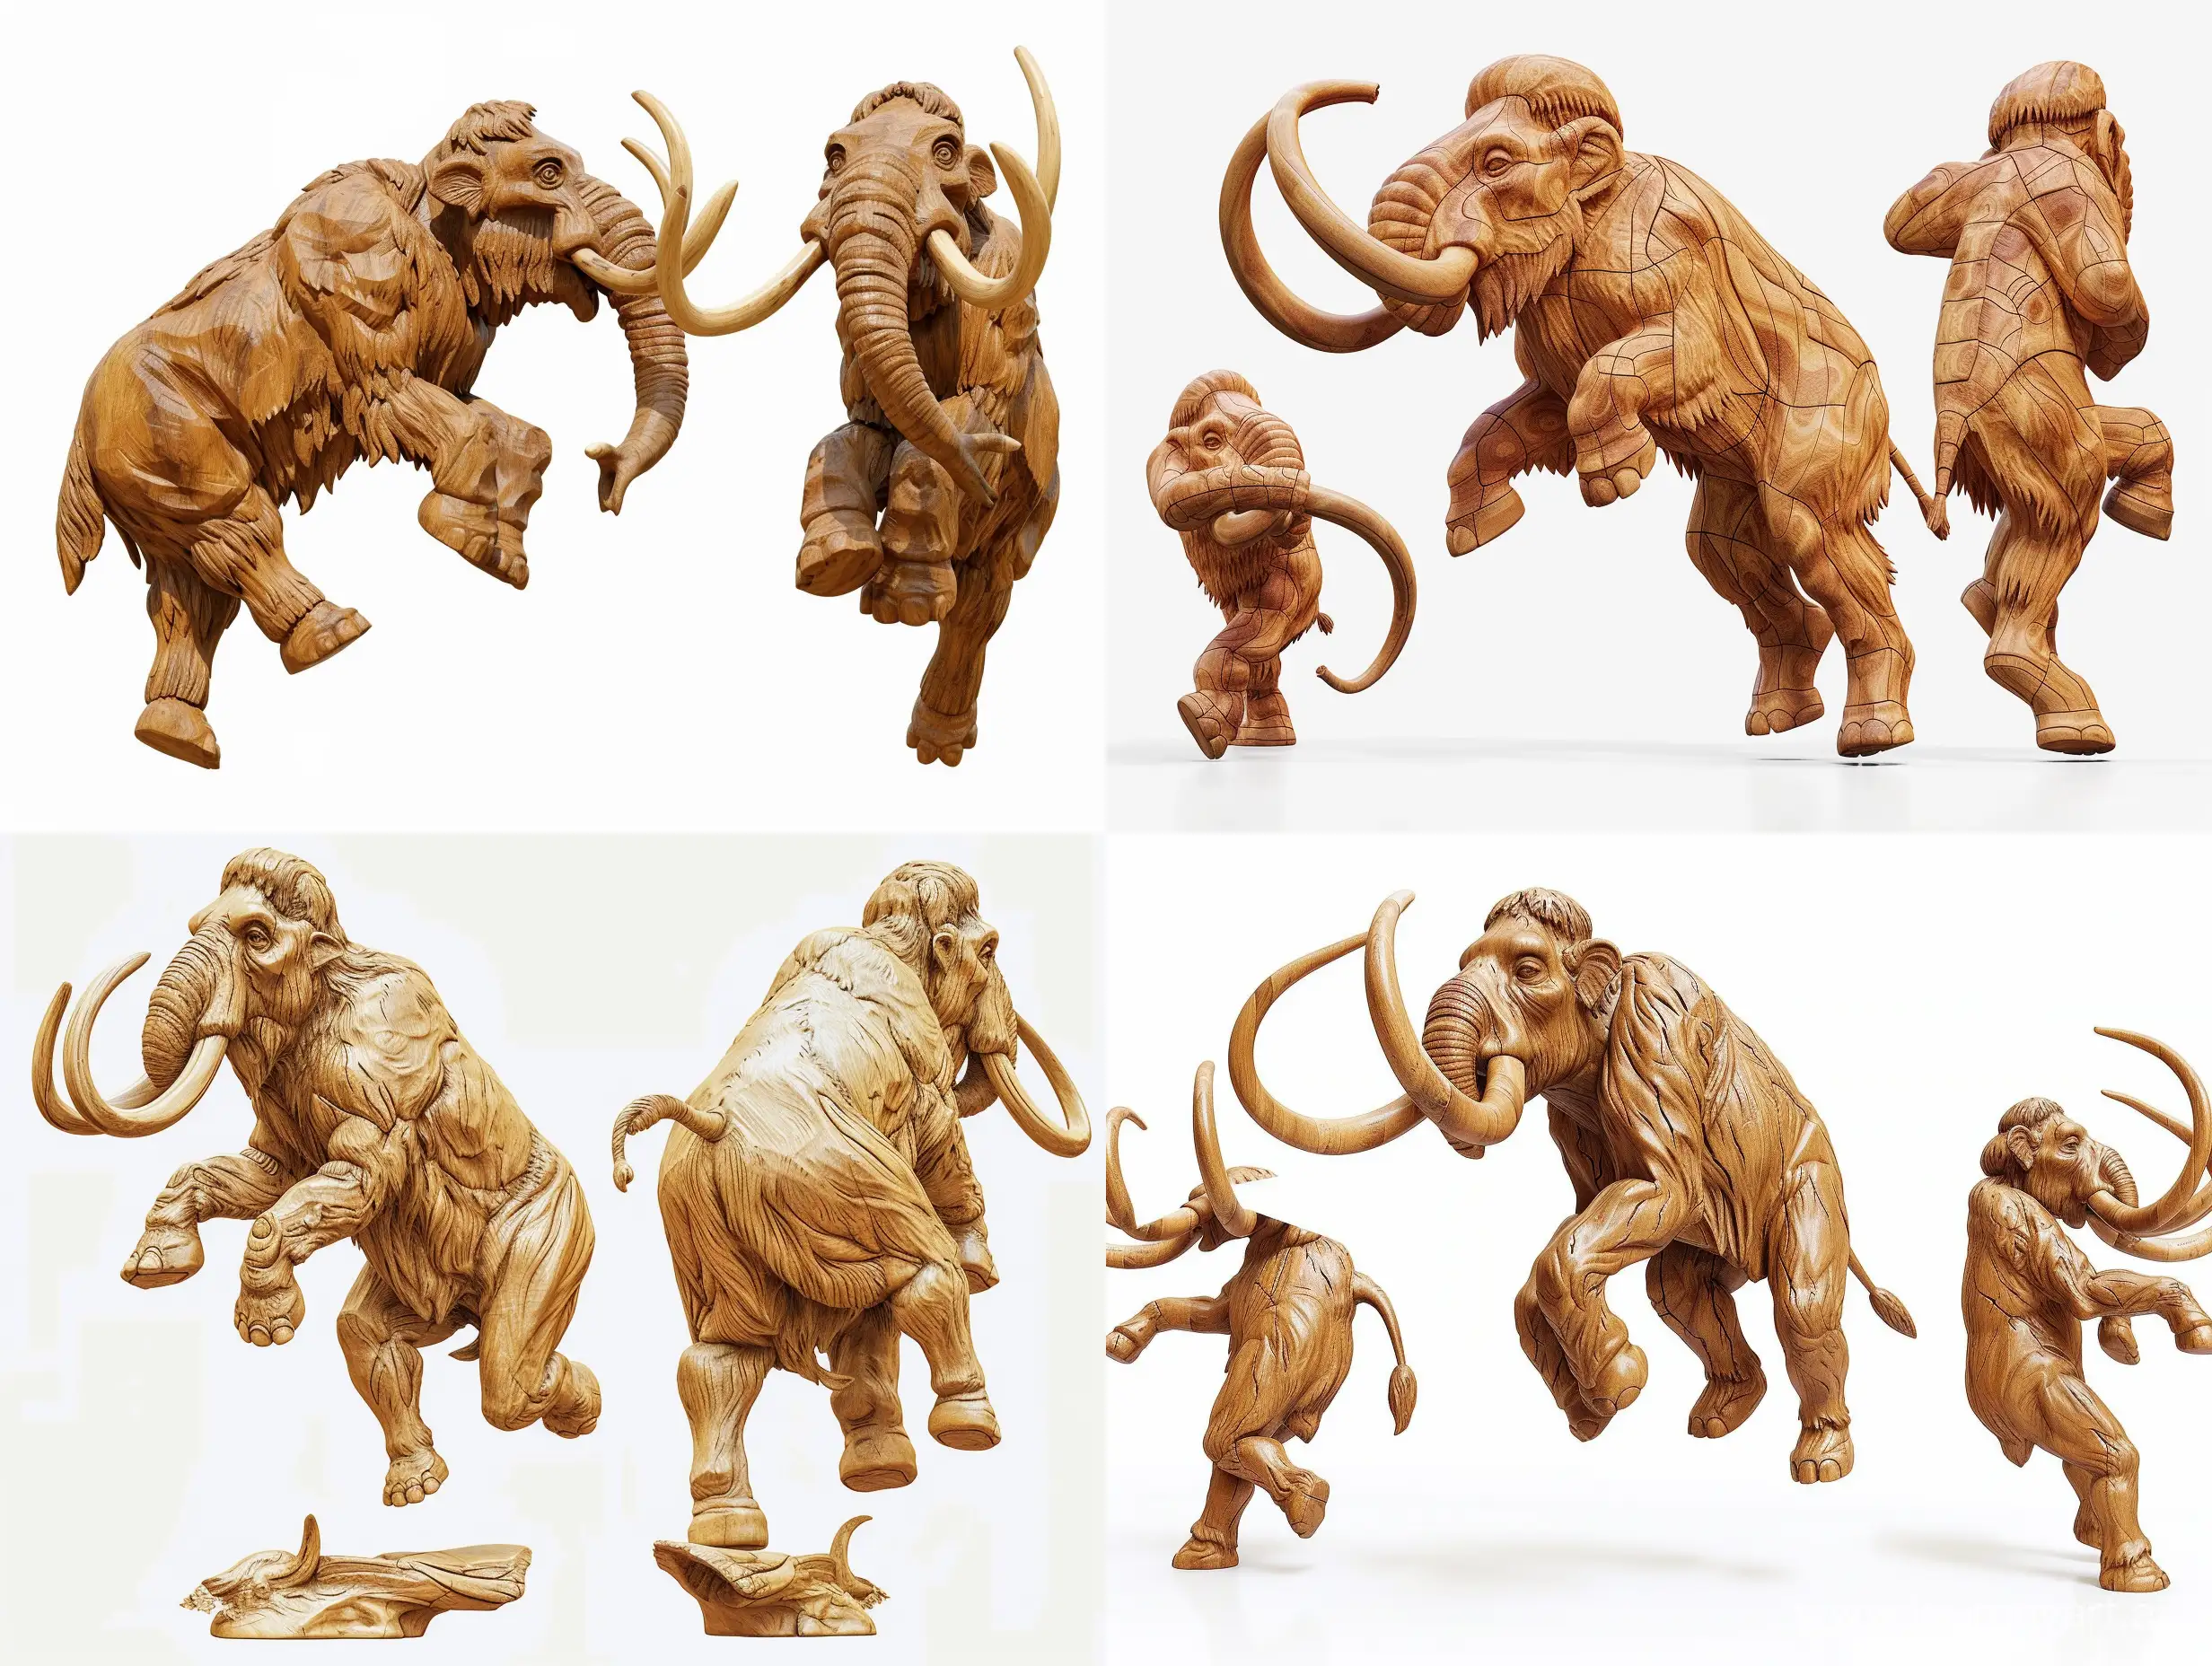 Ultra-Realistic-Wooden-Woolly-Mammoth-Sculpture-Jumping-in-Full-Profile-and-Front-View